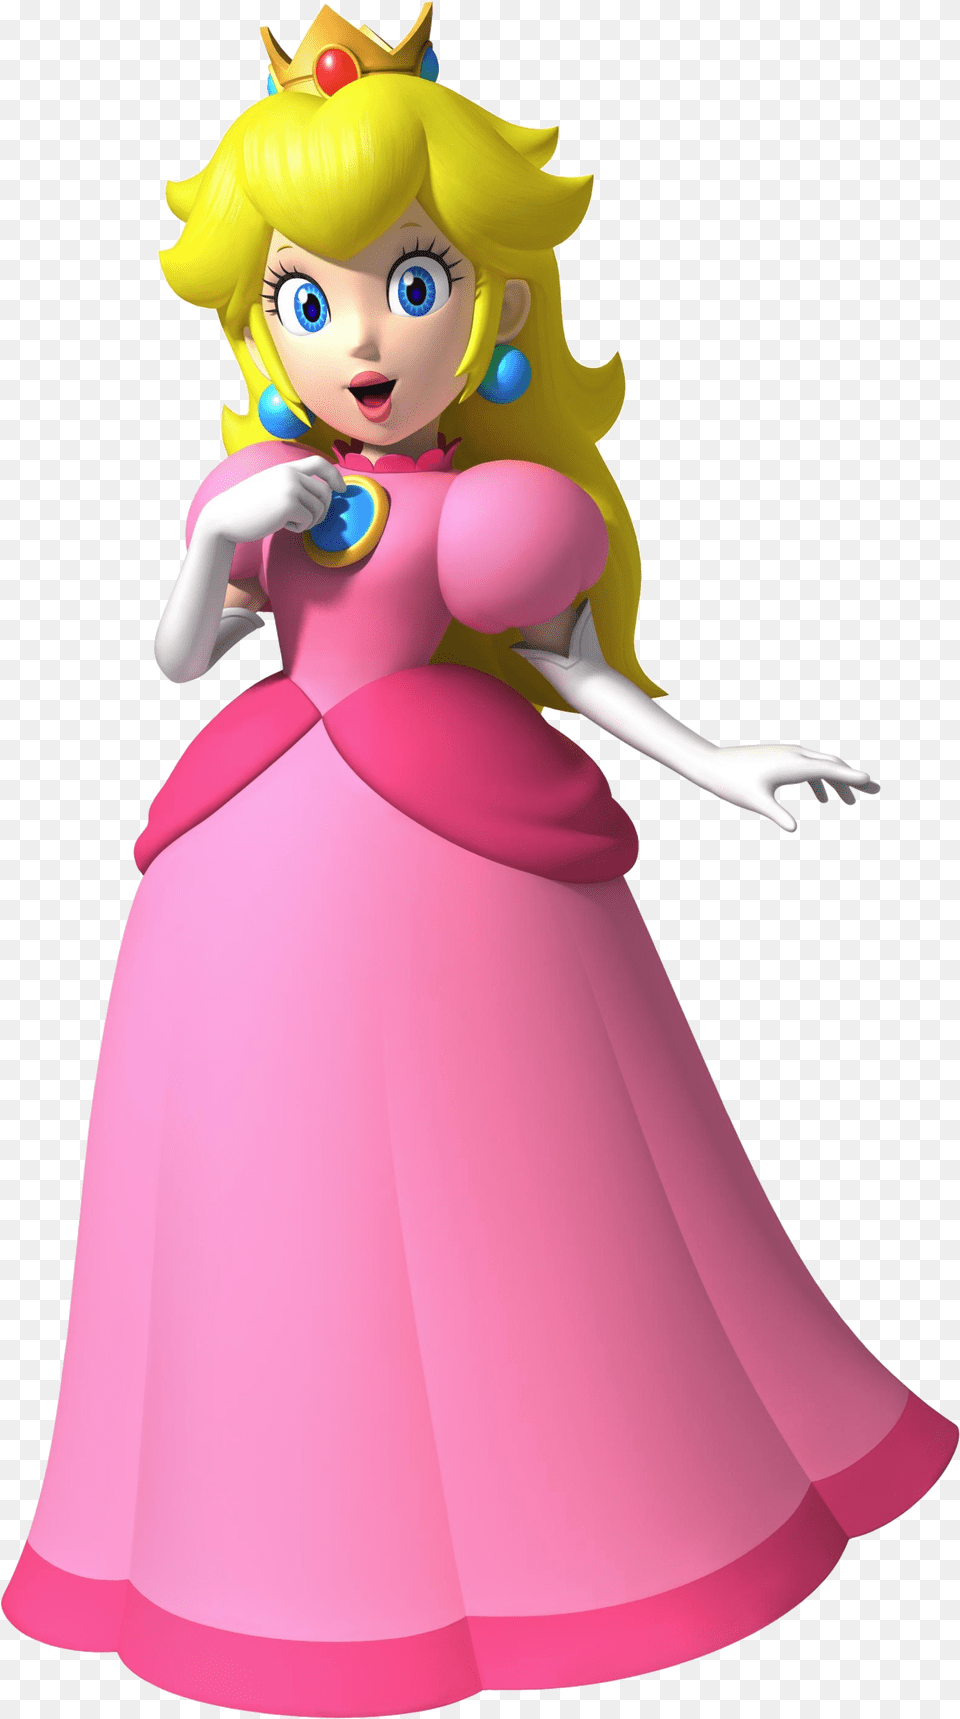 Jpg Library Download Princess Peach Encyclopedia Gamia Princess Peach, Baby, Person, Doll, Toy Free Png